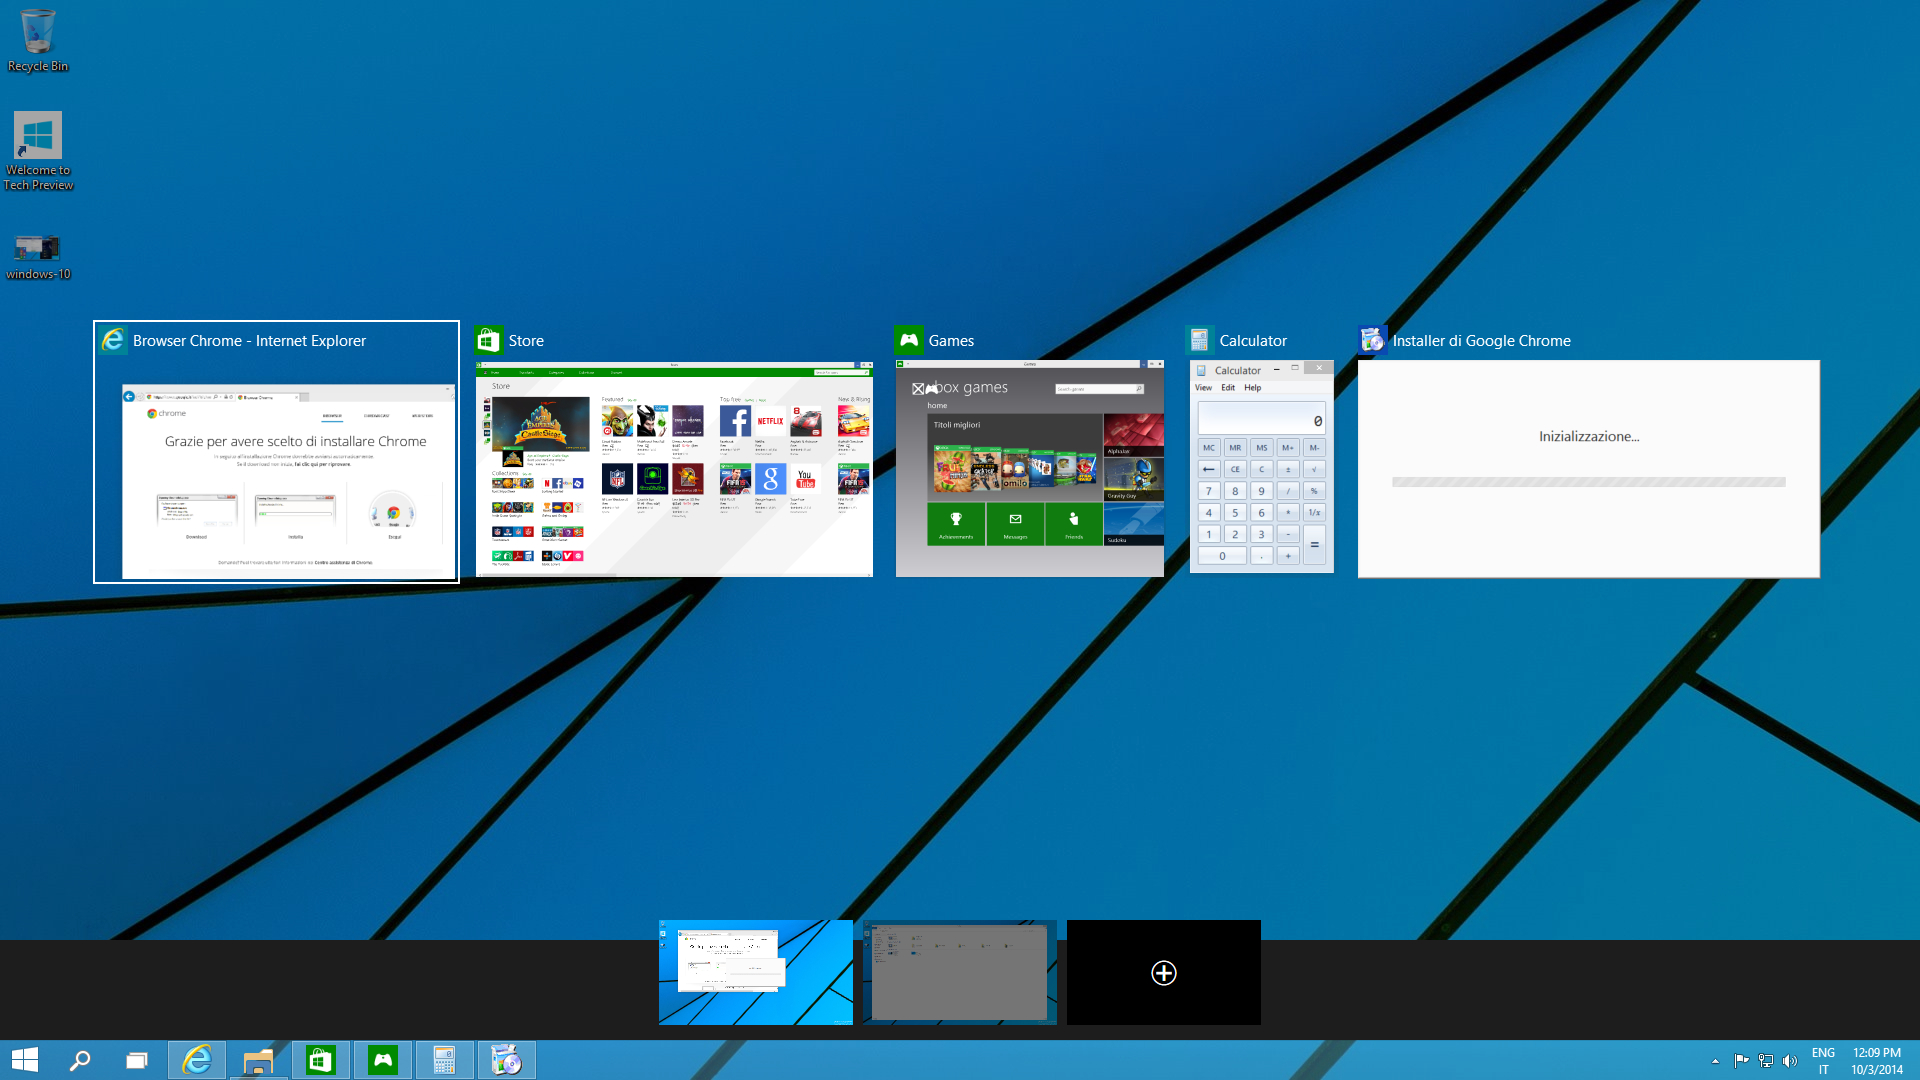 User guide to Windows 10 | Network World